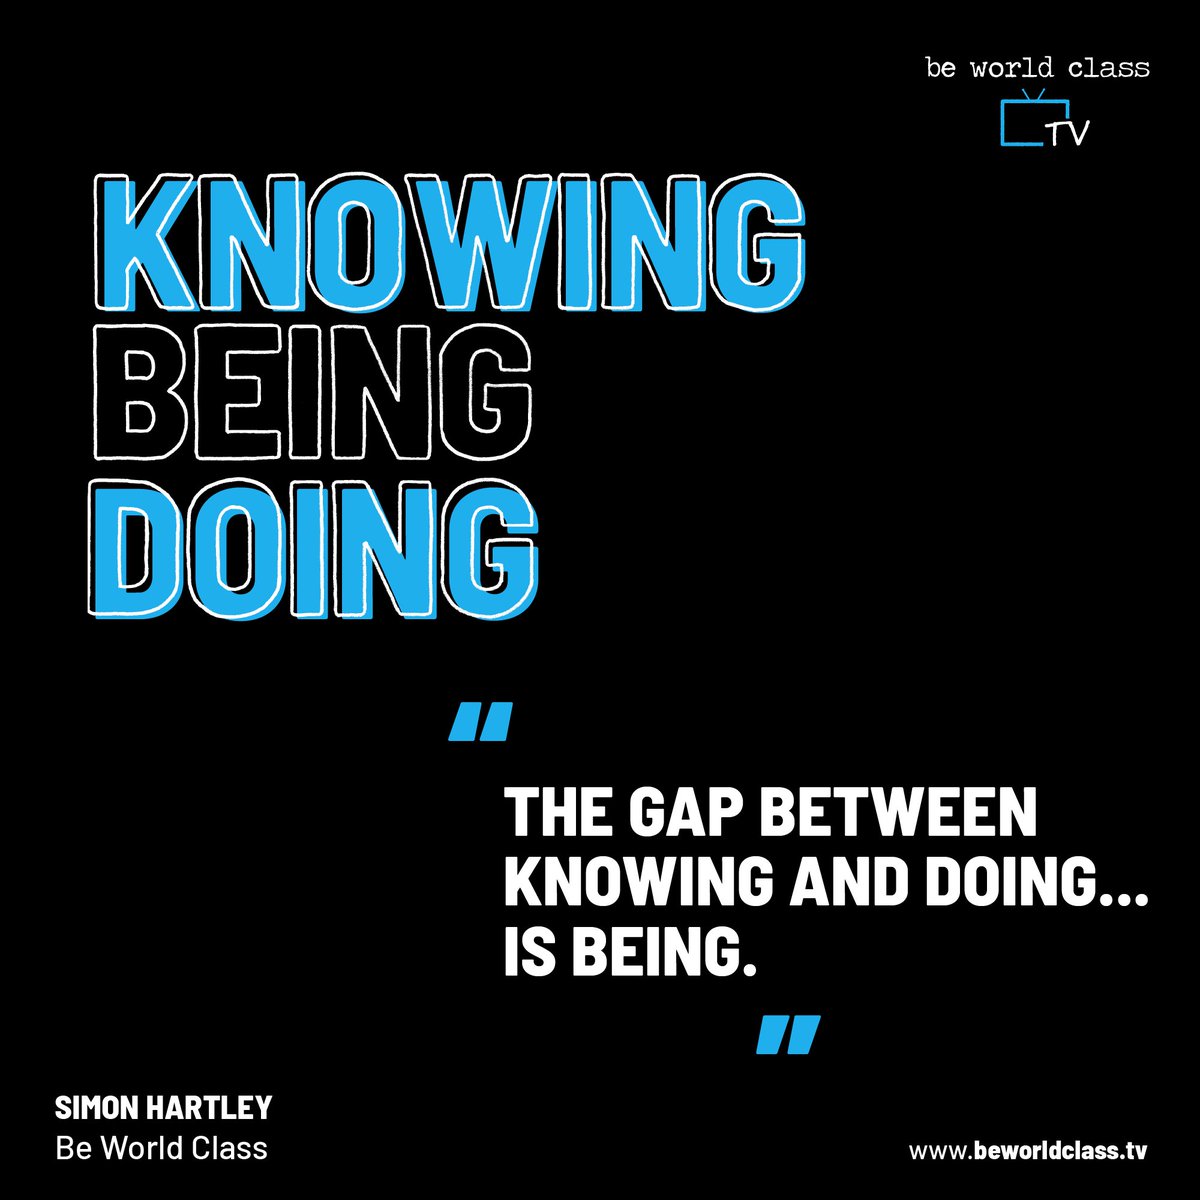 Most people recognise that there's a gap between 'knowing' and 'doing'. But what's the gap? In my experience, it's 'being'. It's a combination of character and identify. To do the things we know we should, we need to BE different. Have a great week!